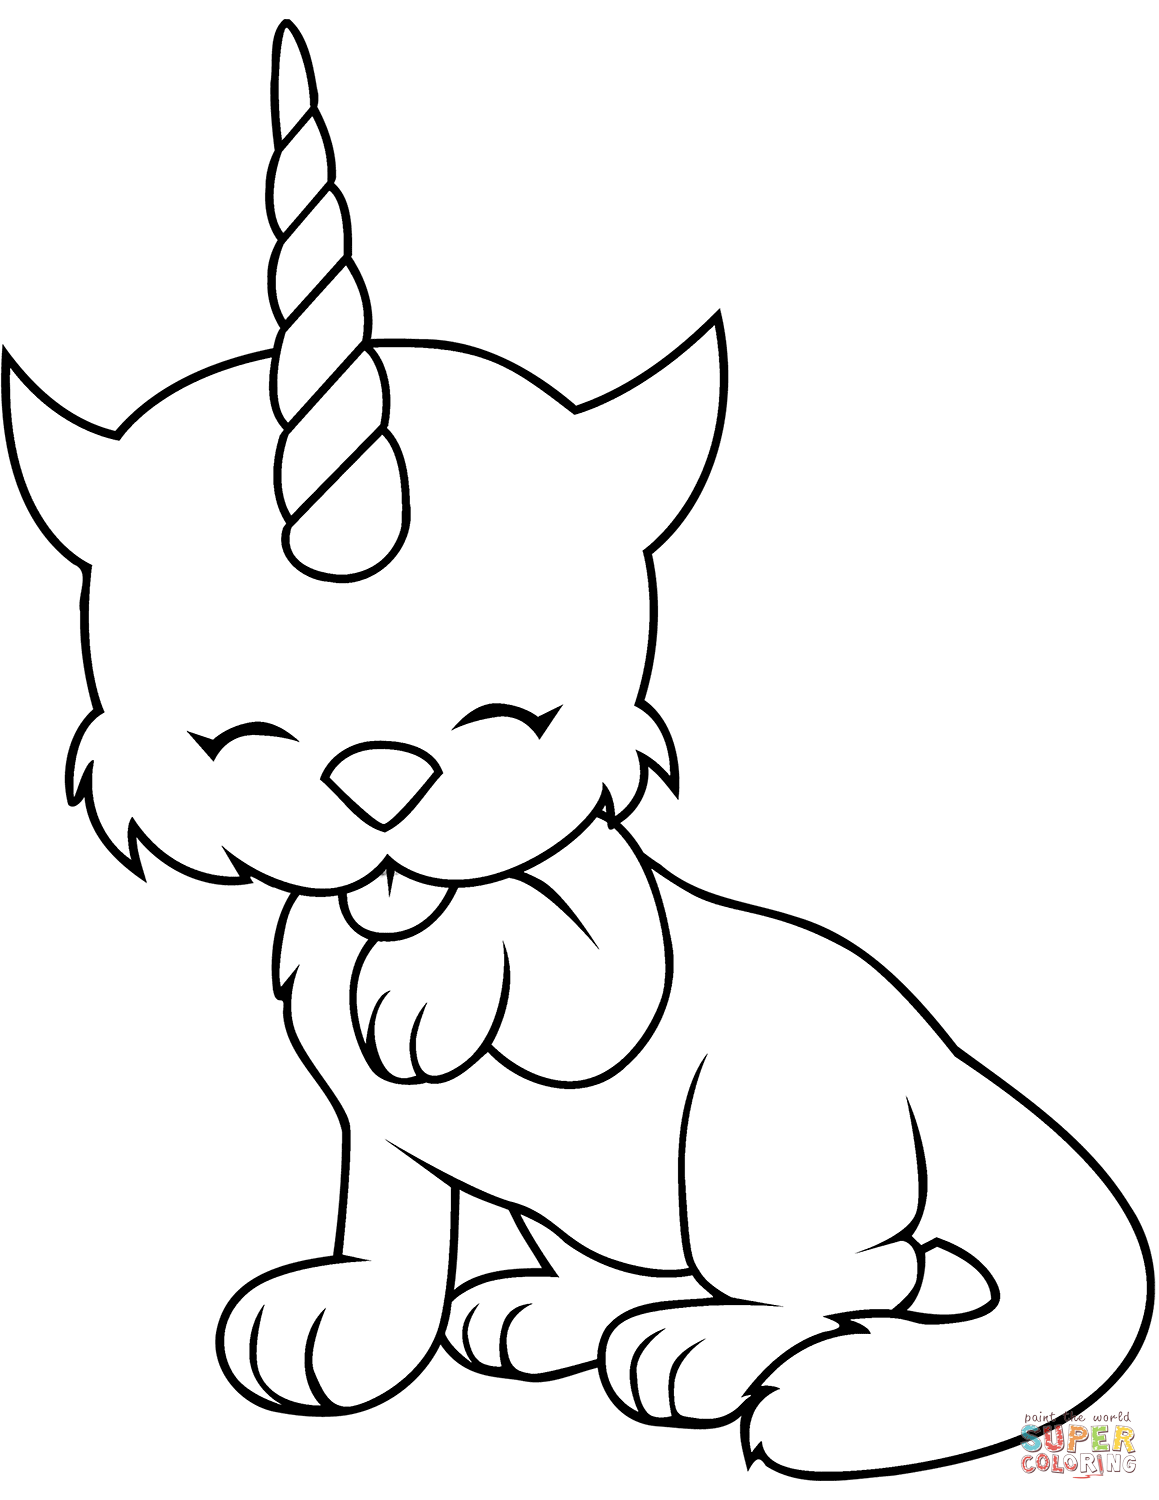 Cat Unicorn coloring page | Free Printable Coloring Pages